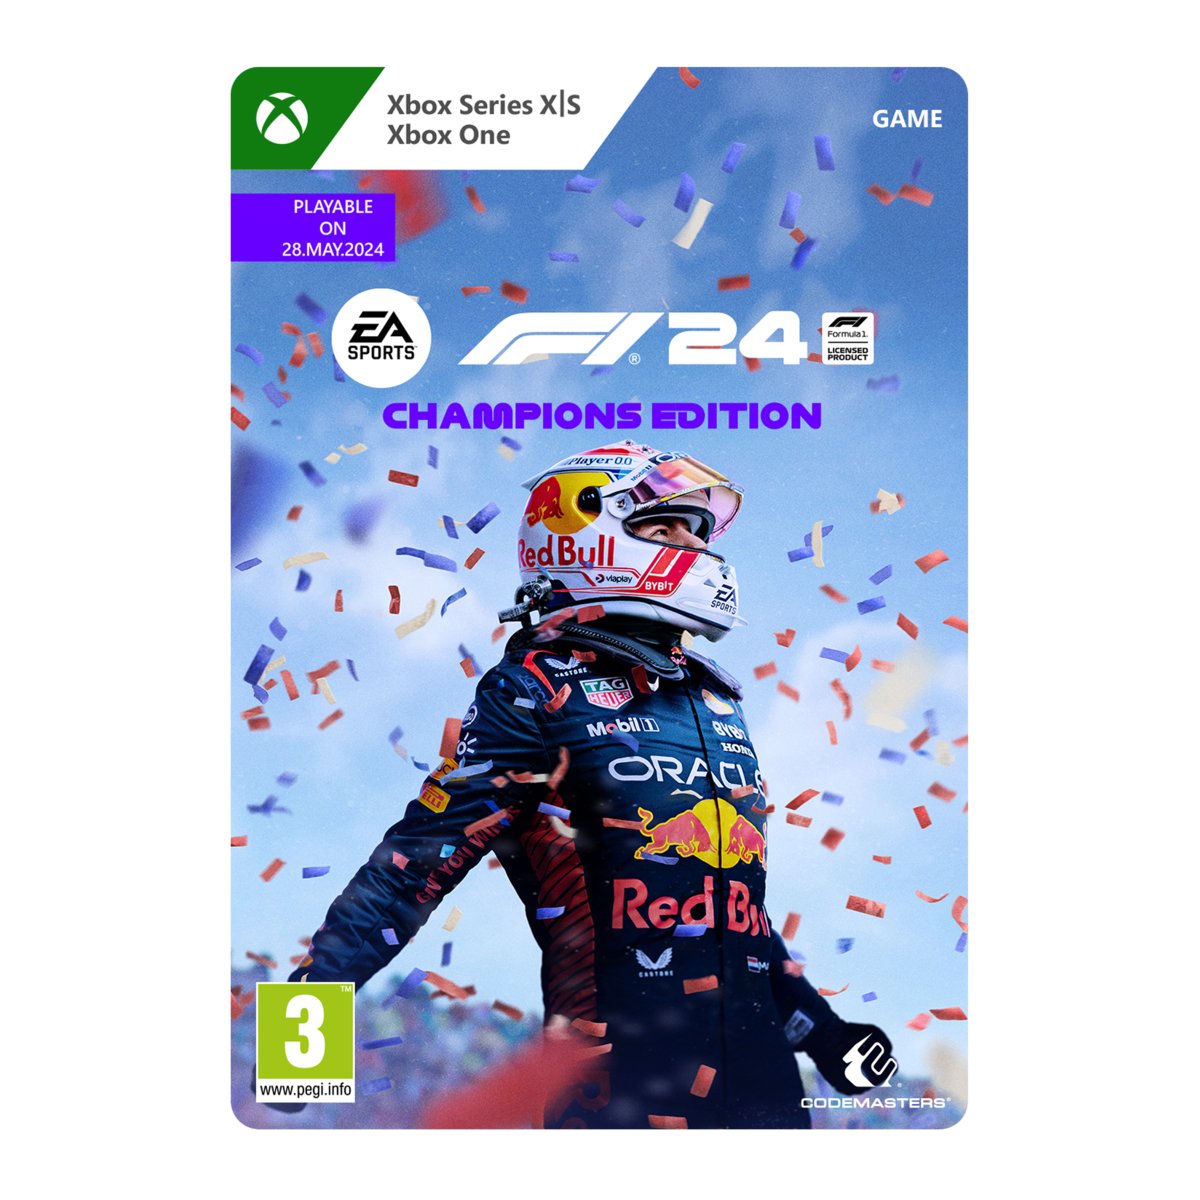 #XBOXDIGITAL £73.85 F1 24 Champions Edition #XBOX DIGITAL #EA #F124ChampionsEdition: Please note, codes will be delivered on the 07th May 2024 02:00 (CEST) 01:00 (UK), and the game will unlock on the 31st May 2024 02:00 (CEST) 01:00 (UK) Release Date… dlvr.it/T6K7lv